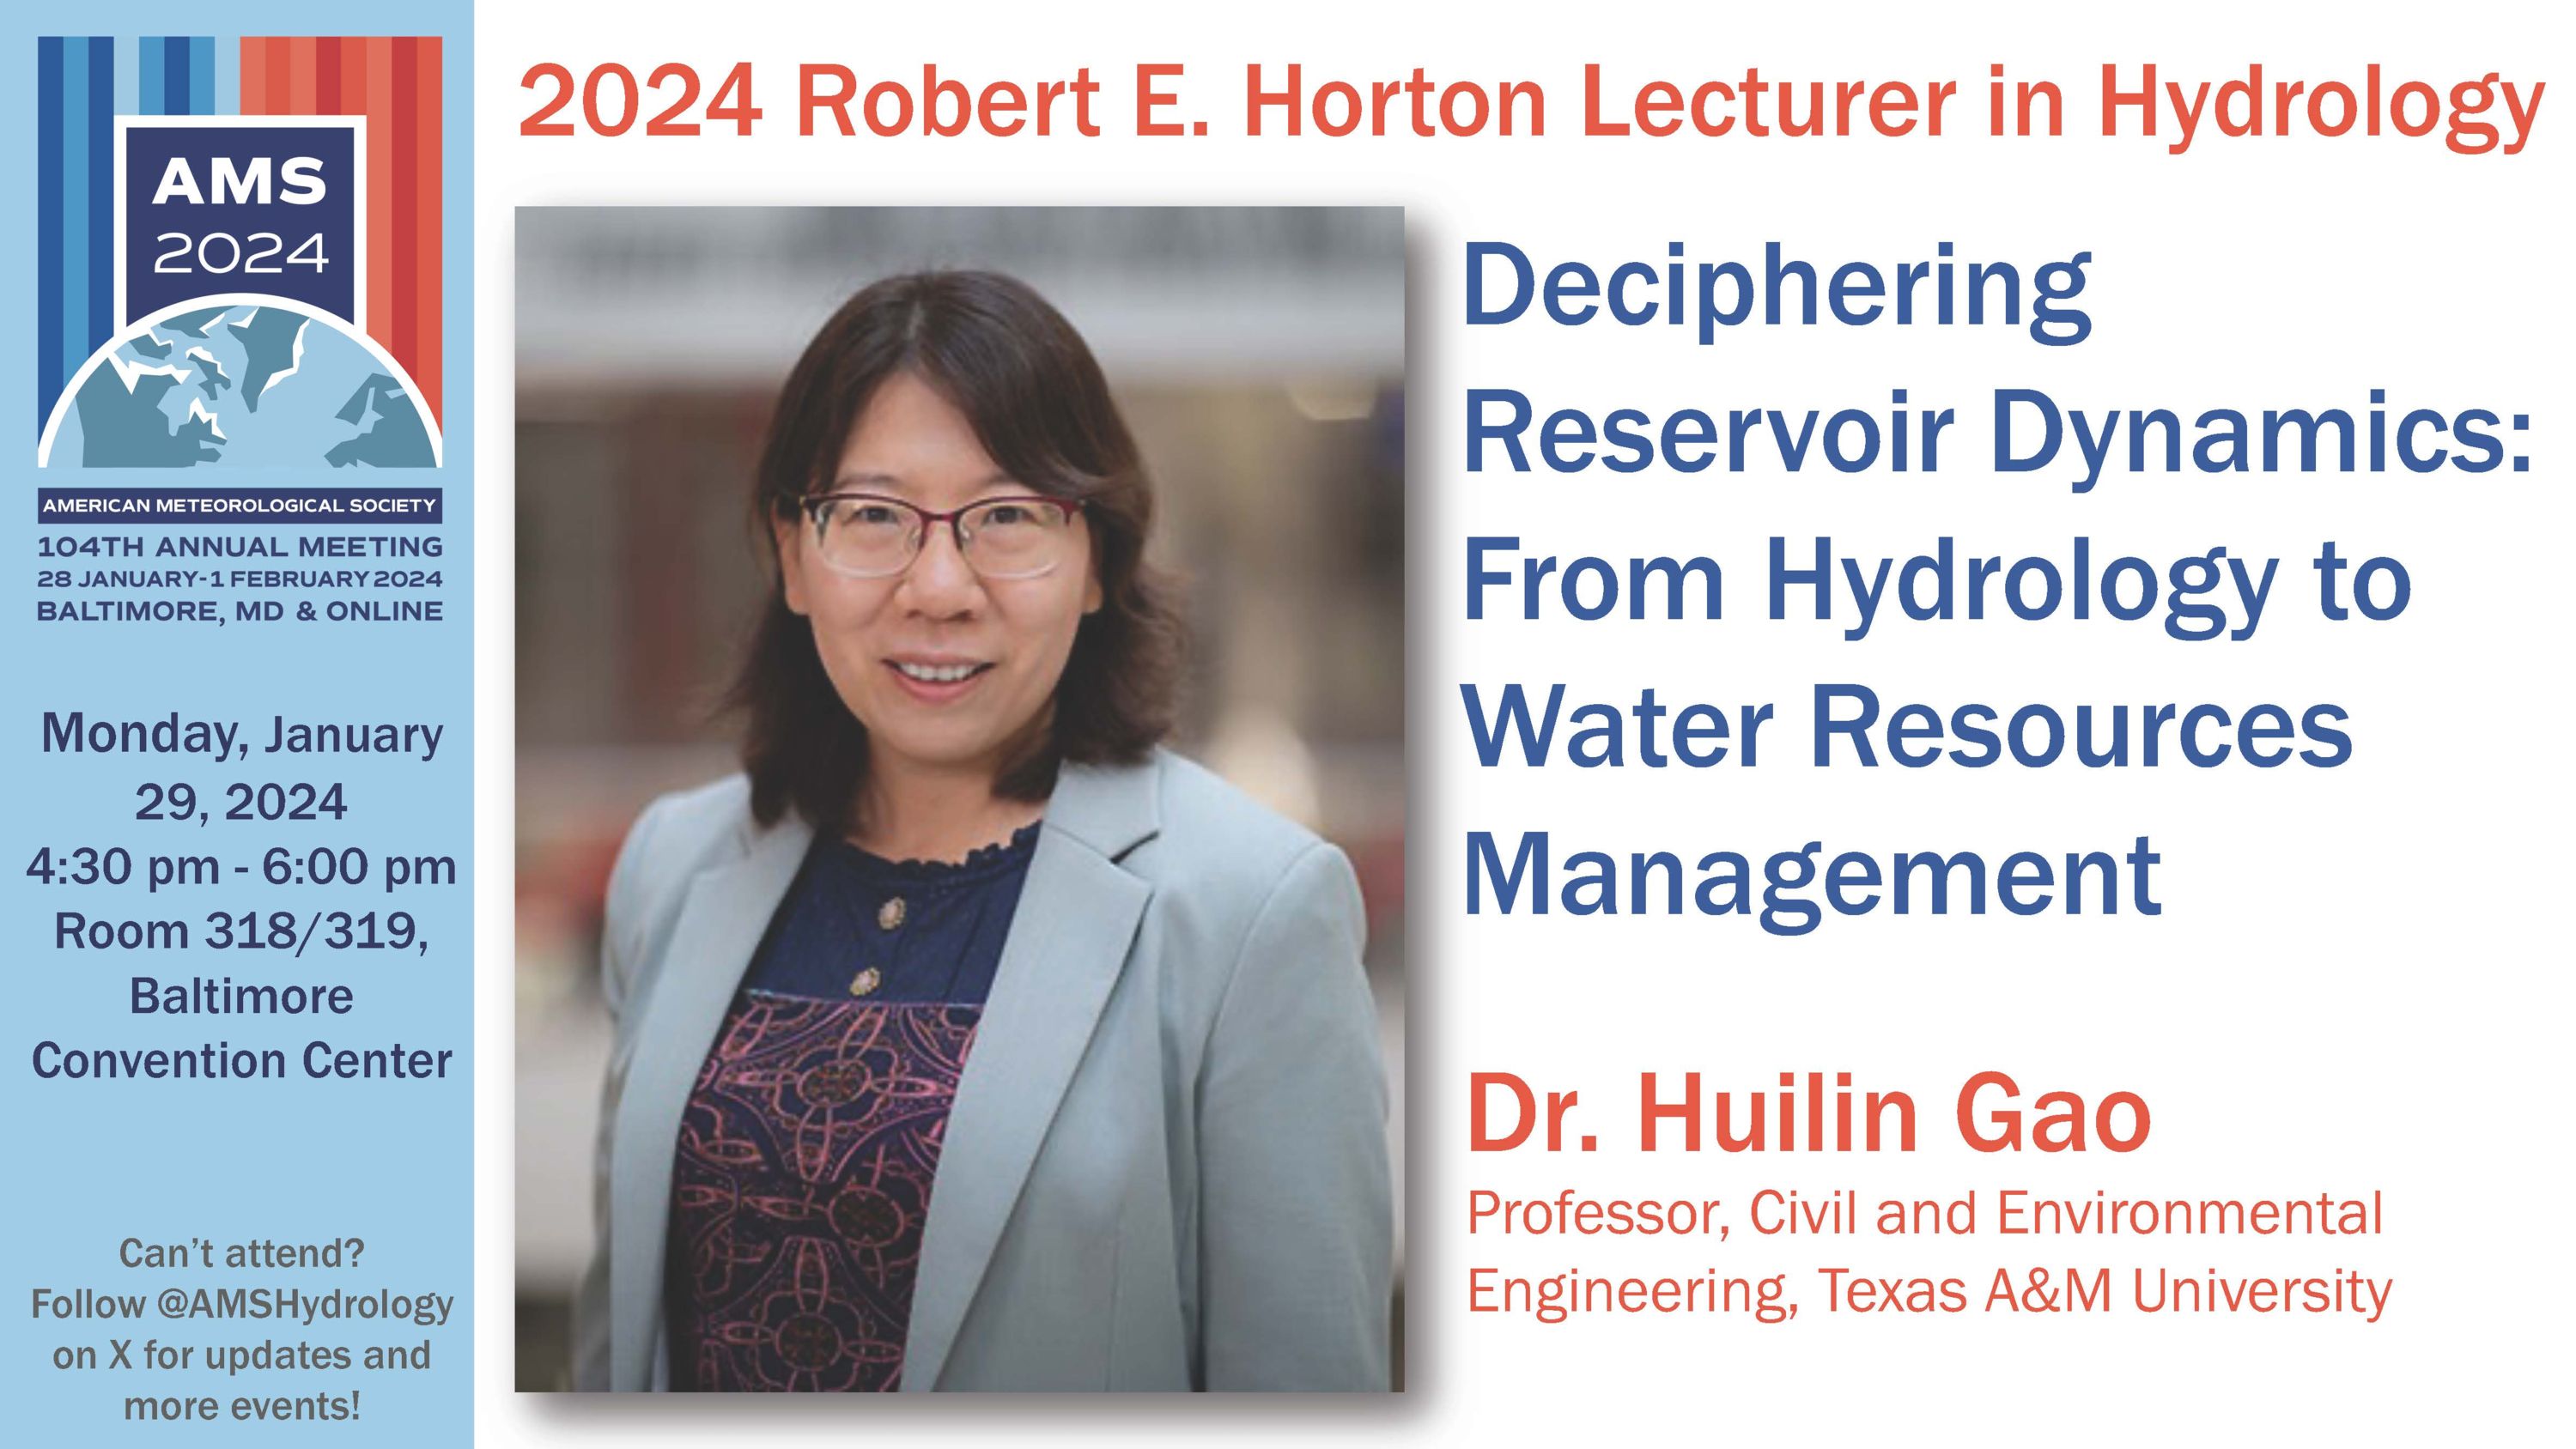 38th Conference on Hydrology 2024 AMS Annual Meeting